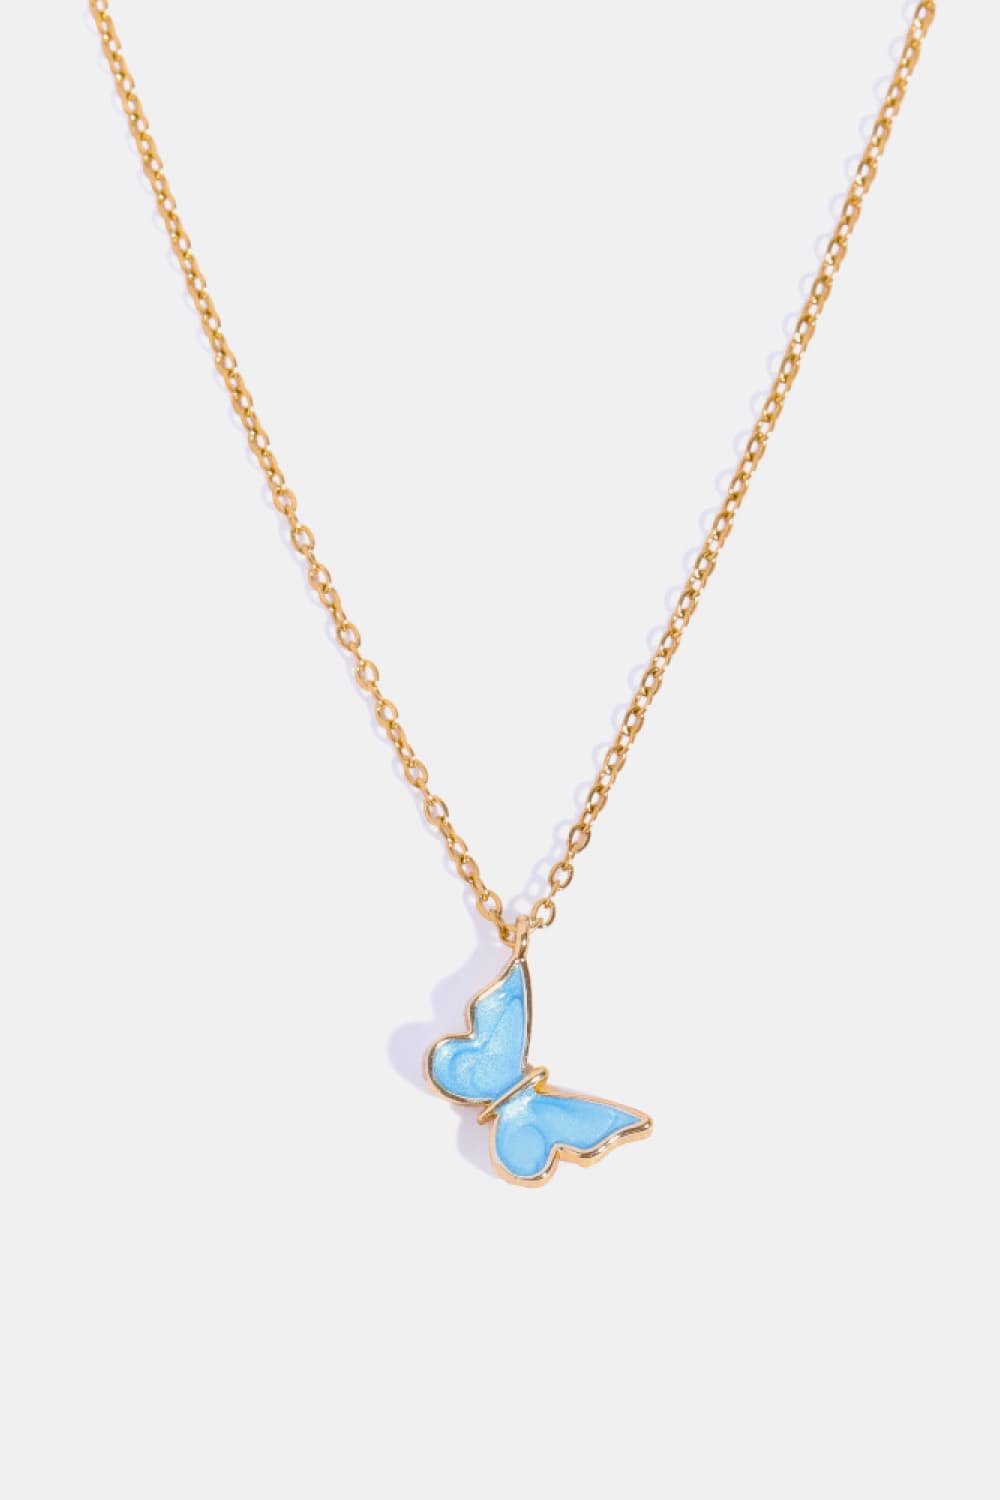 Trendsi Cupid Beauty Supplies Sky Blue / One Size Women Necklace Butterfly Pendant Copper 14K Gold-Plated Necklace